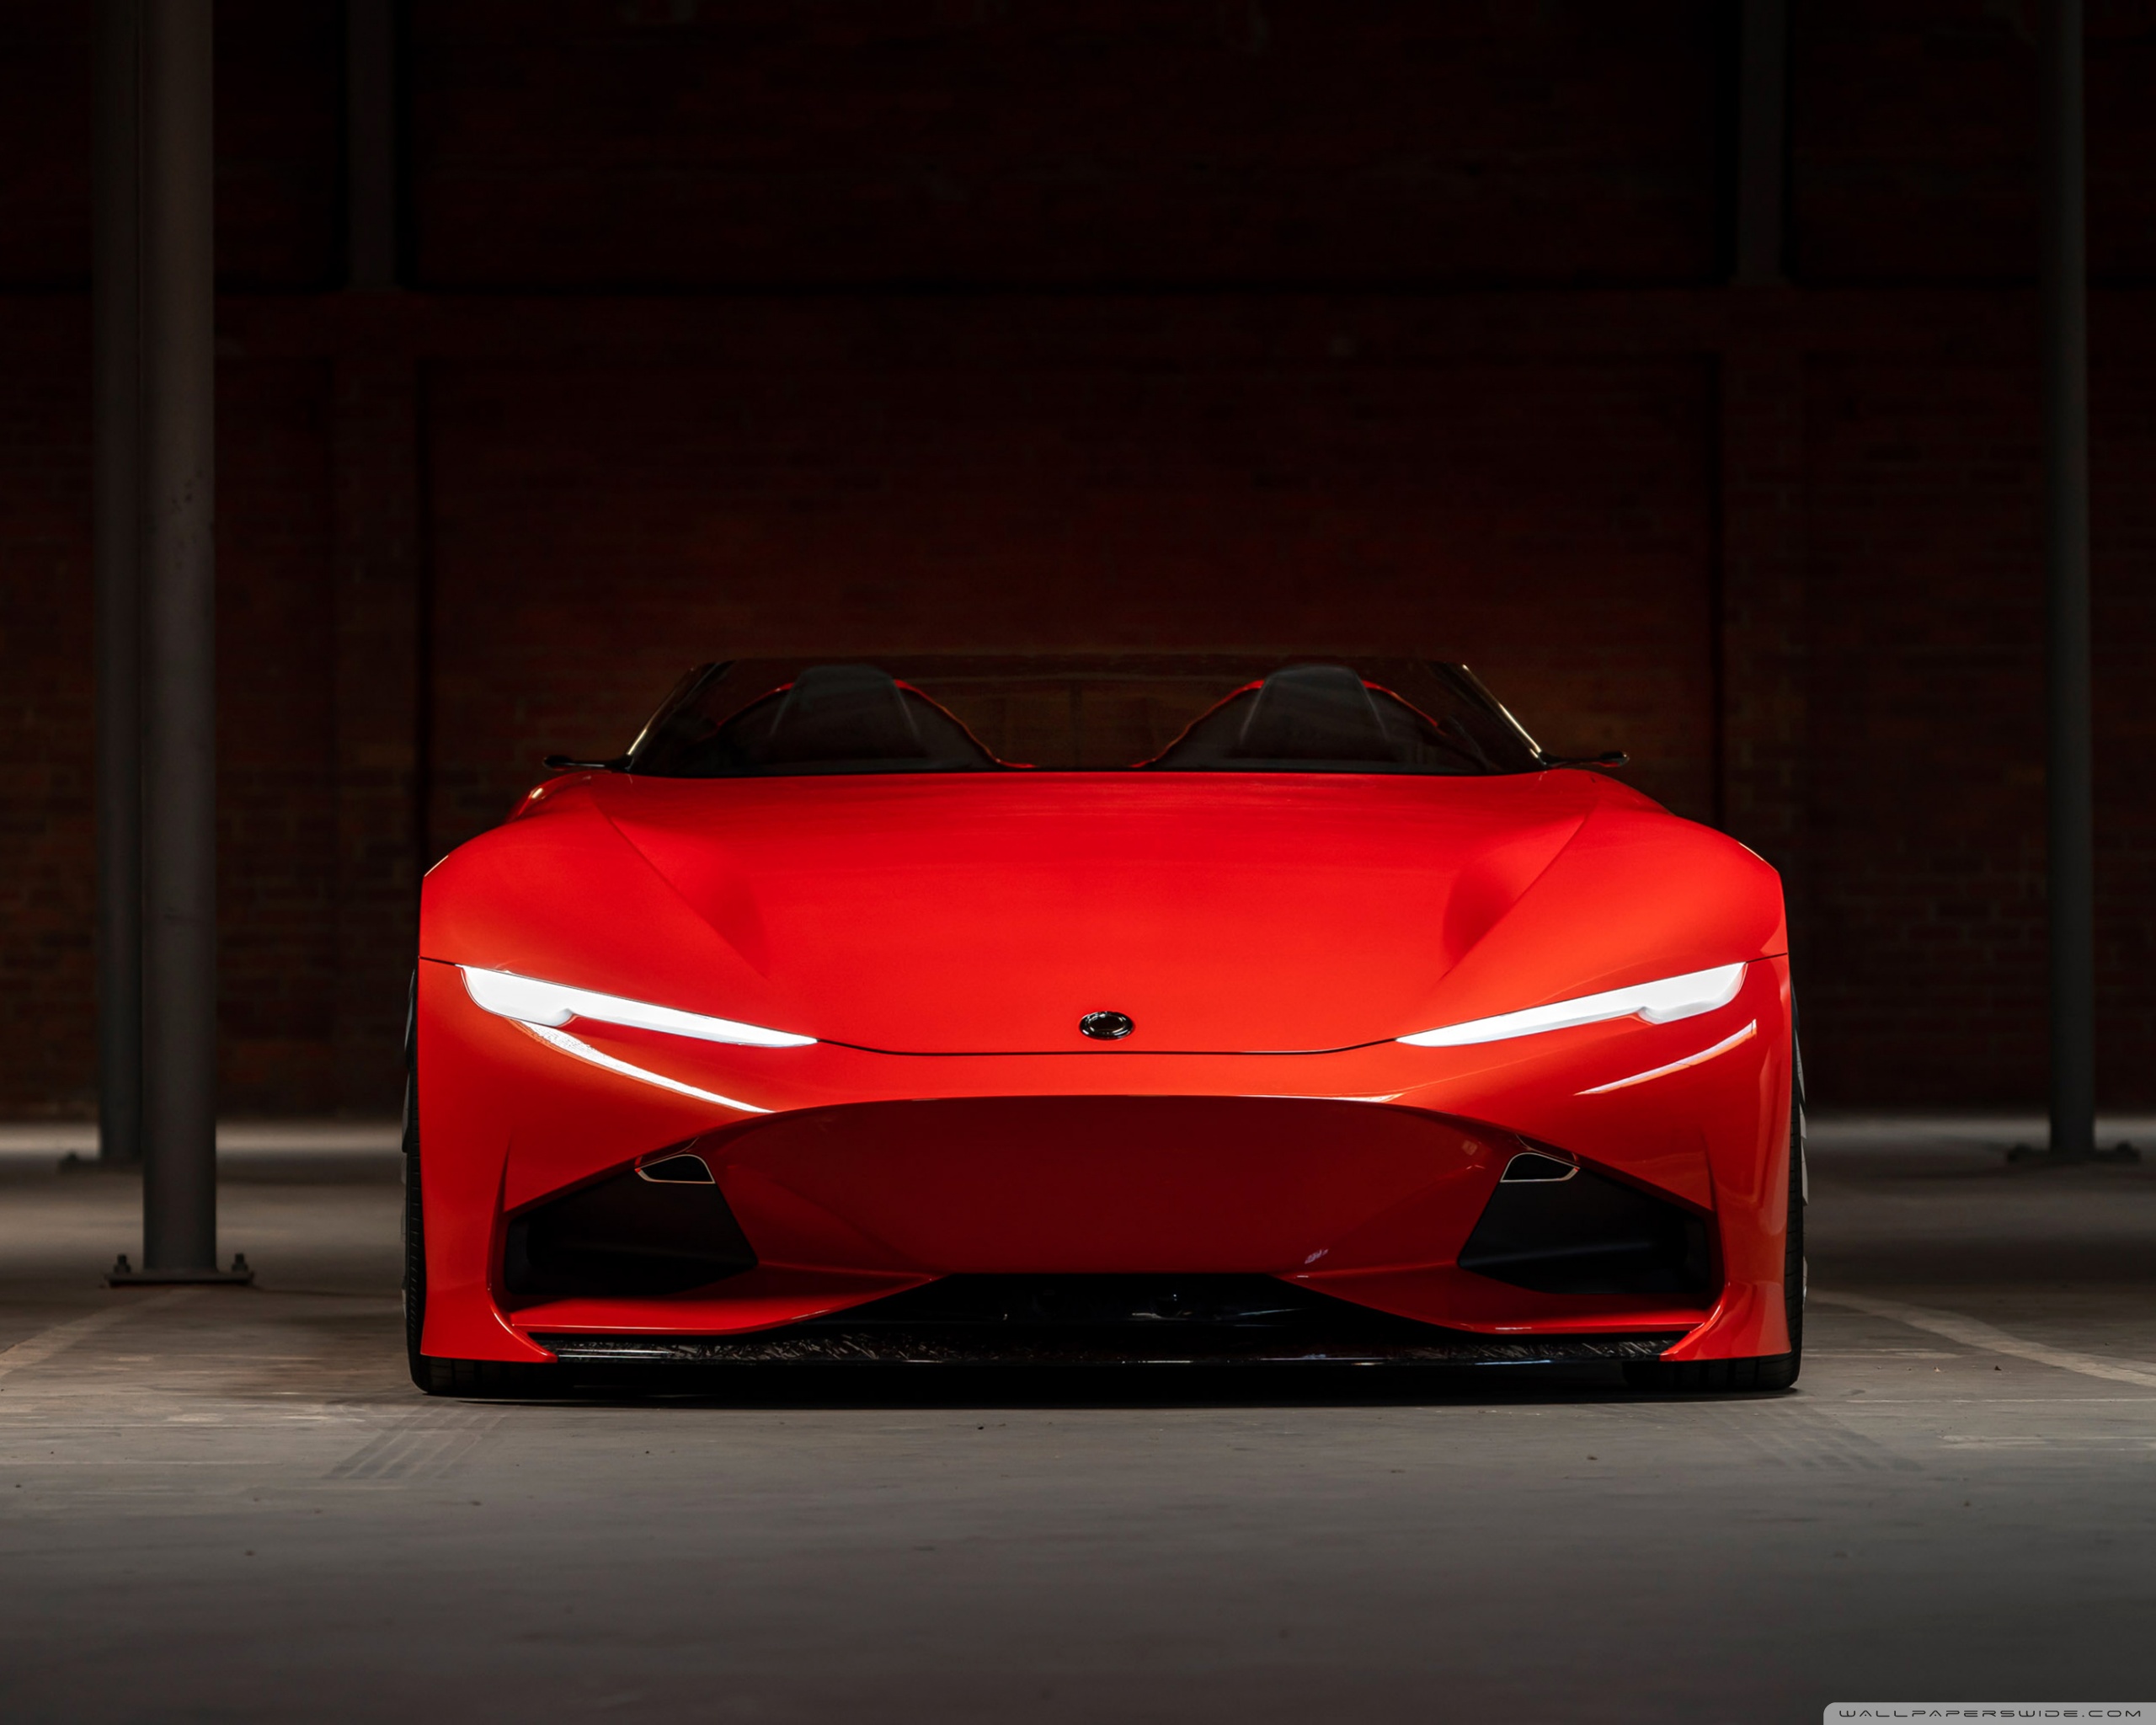 39] Karma SC1 Vision Electric Supercar Wallpapers on